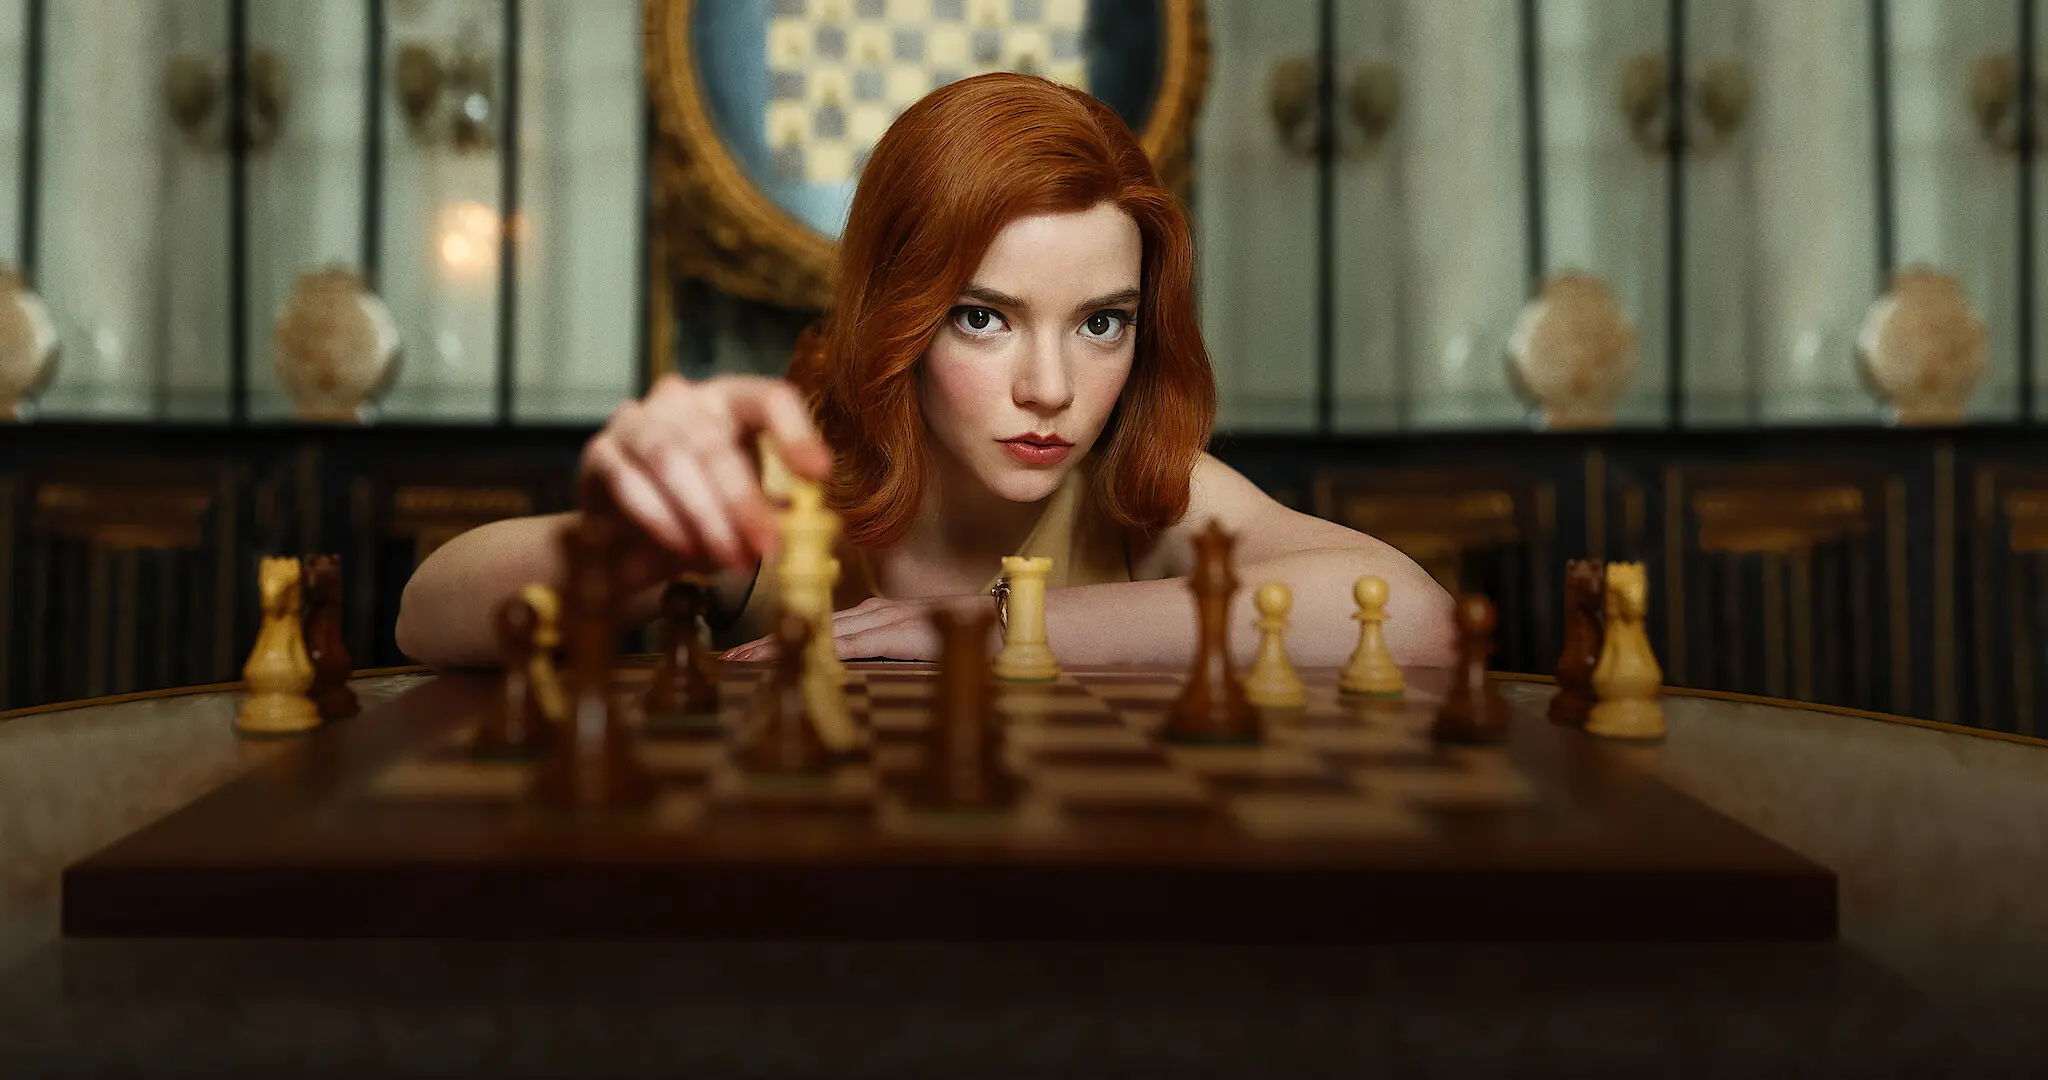 Is 'The Queen's Gambit' a True Story? - The Real Story Behind Anya